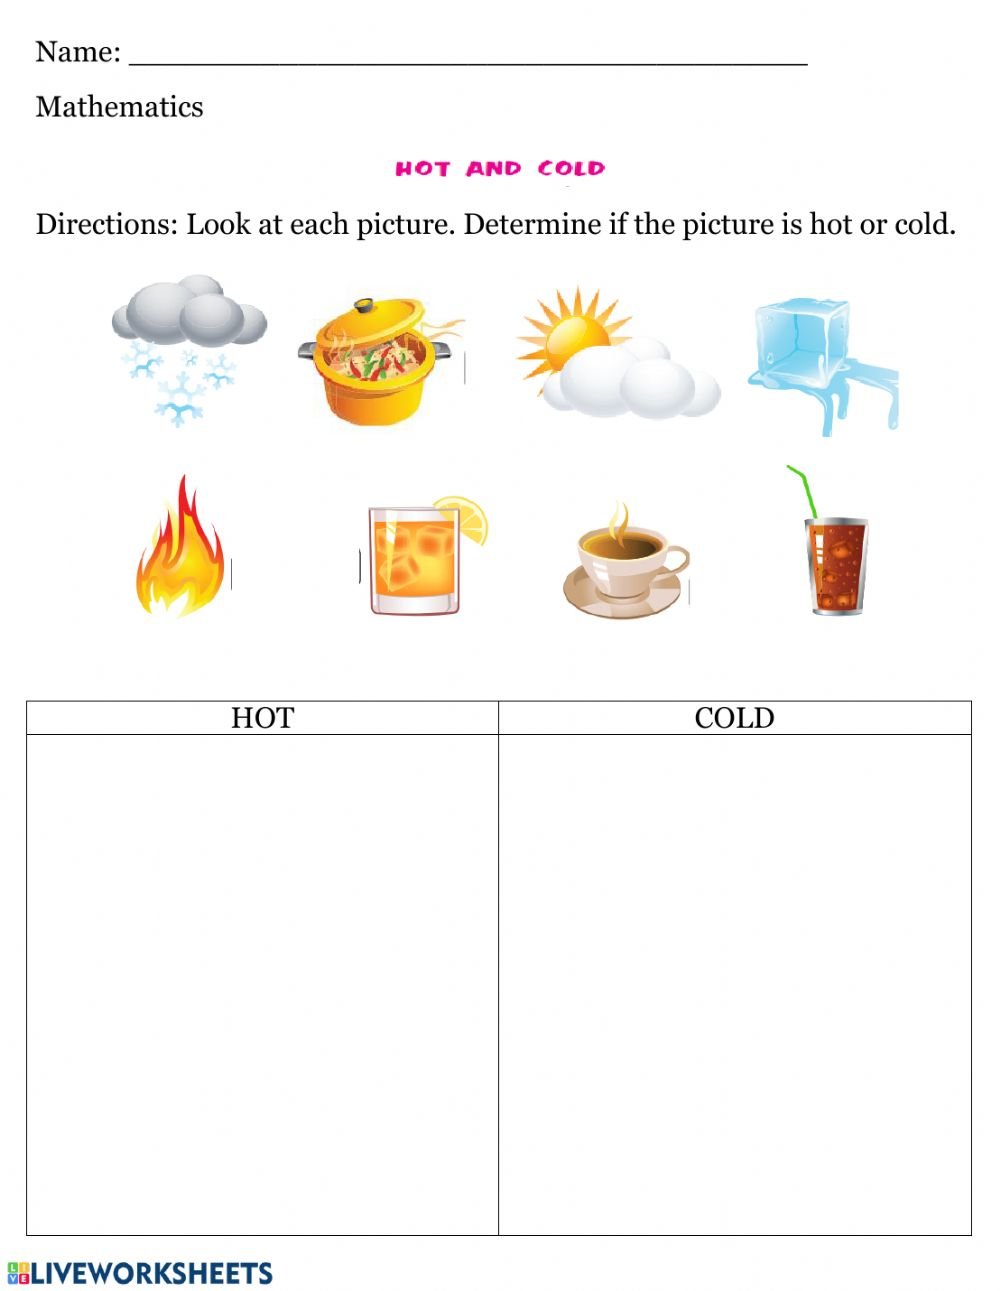 hot-and-cold-pictures-worksheets-worksheetscity